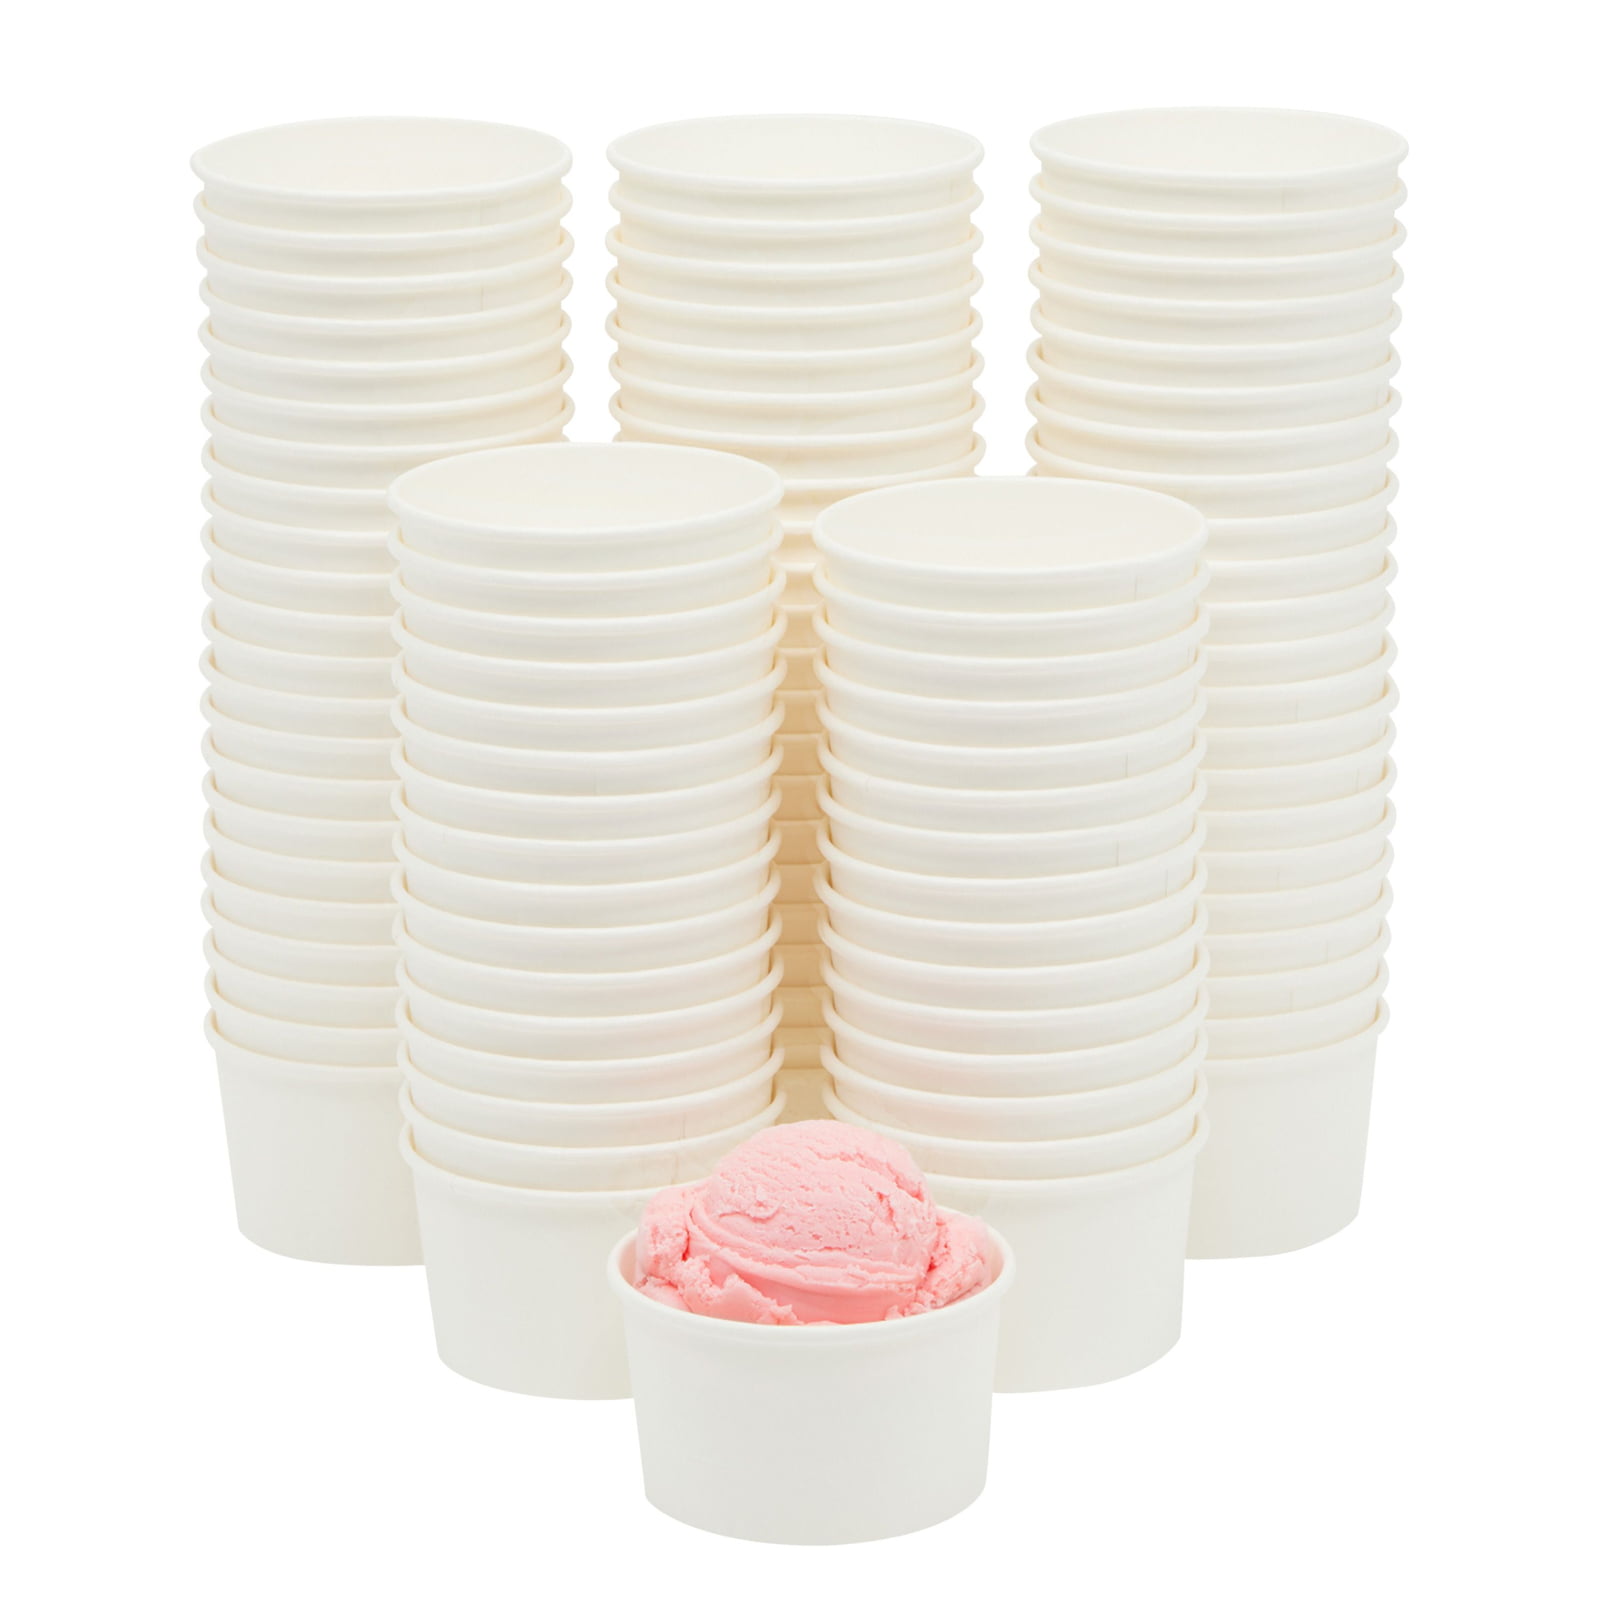 100 x Paper Cups Orange Party Cups Birthday Party Catering Events Tableware 